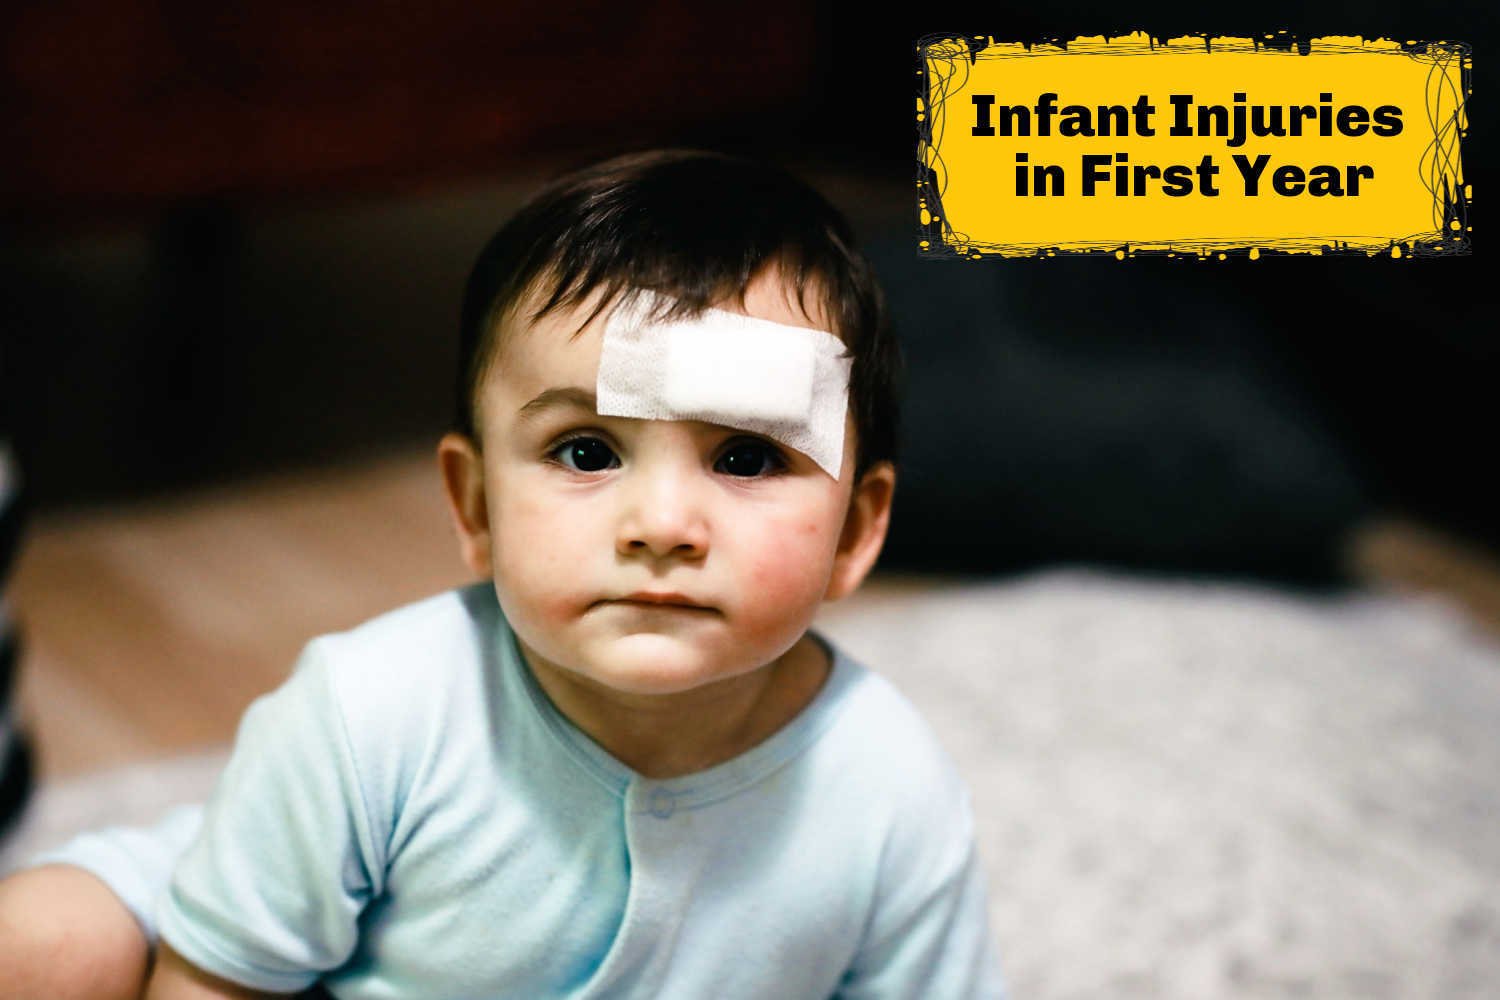 Infant Injuries in the First Year – Common Causes and Prevention